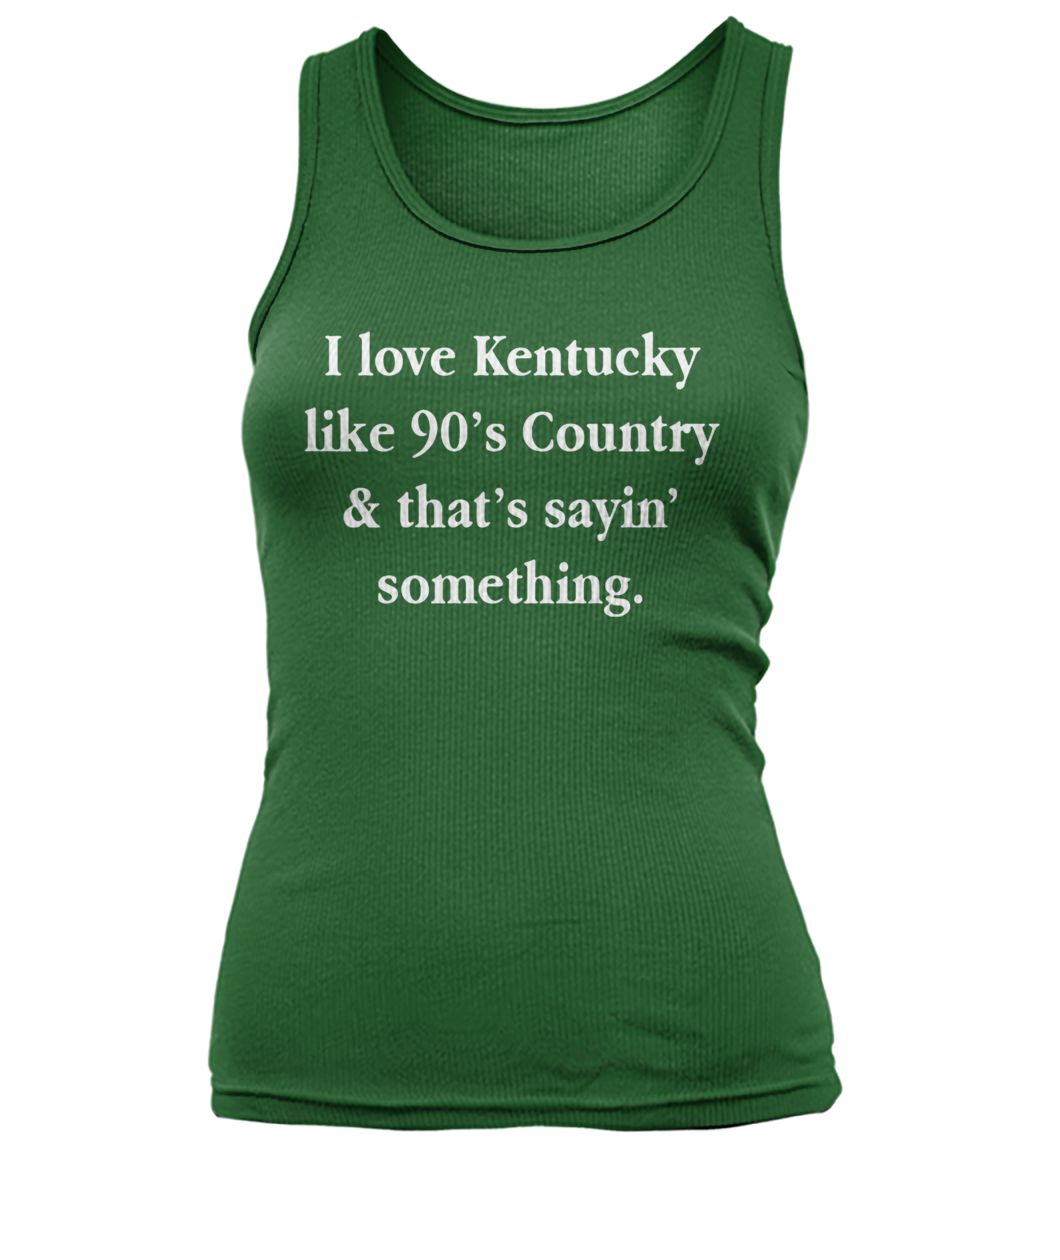 I love Kentucky like 90's country and that sayin' something women's tank top